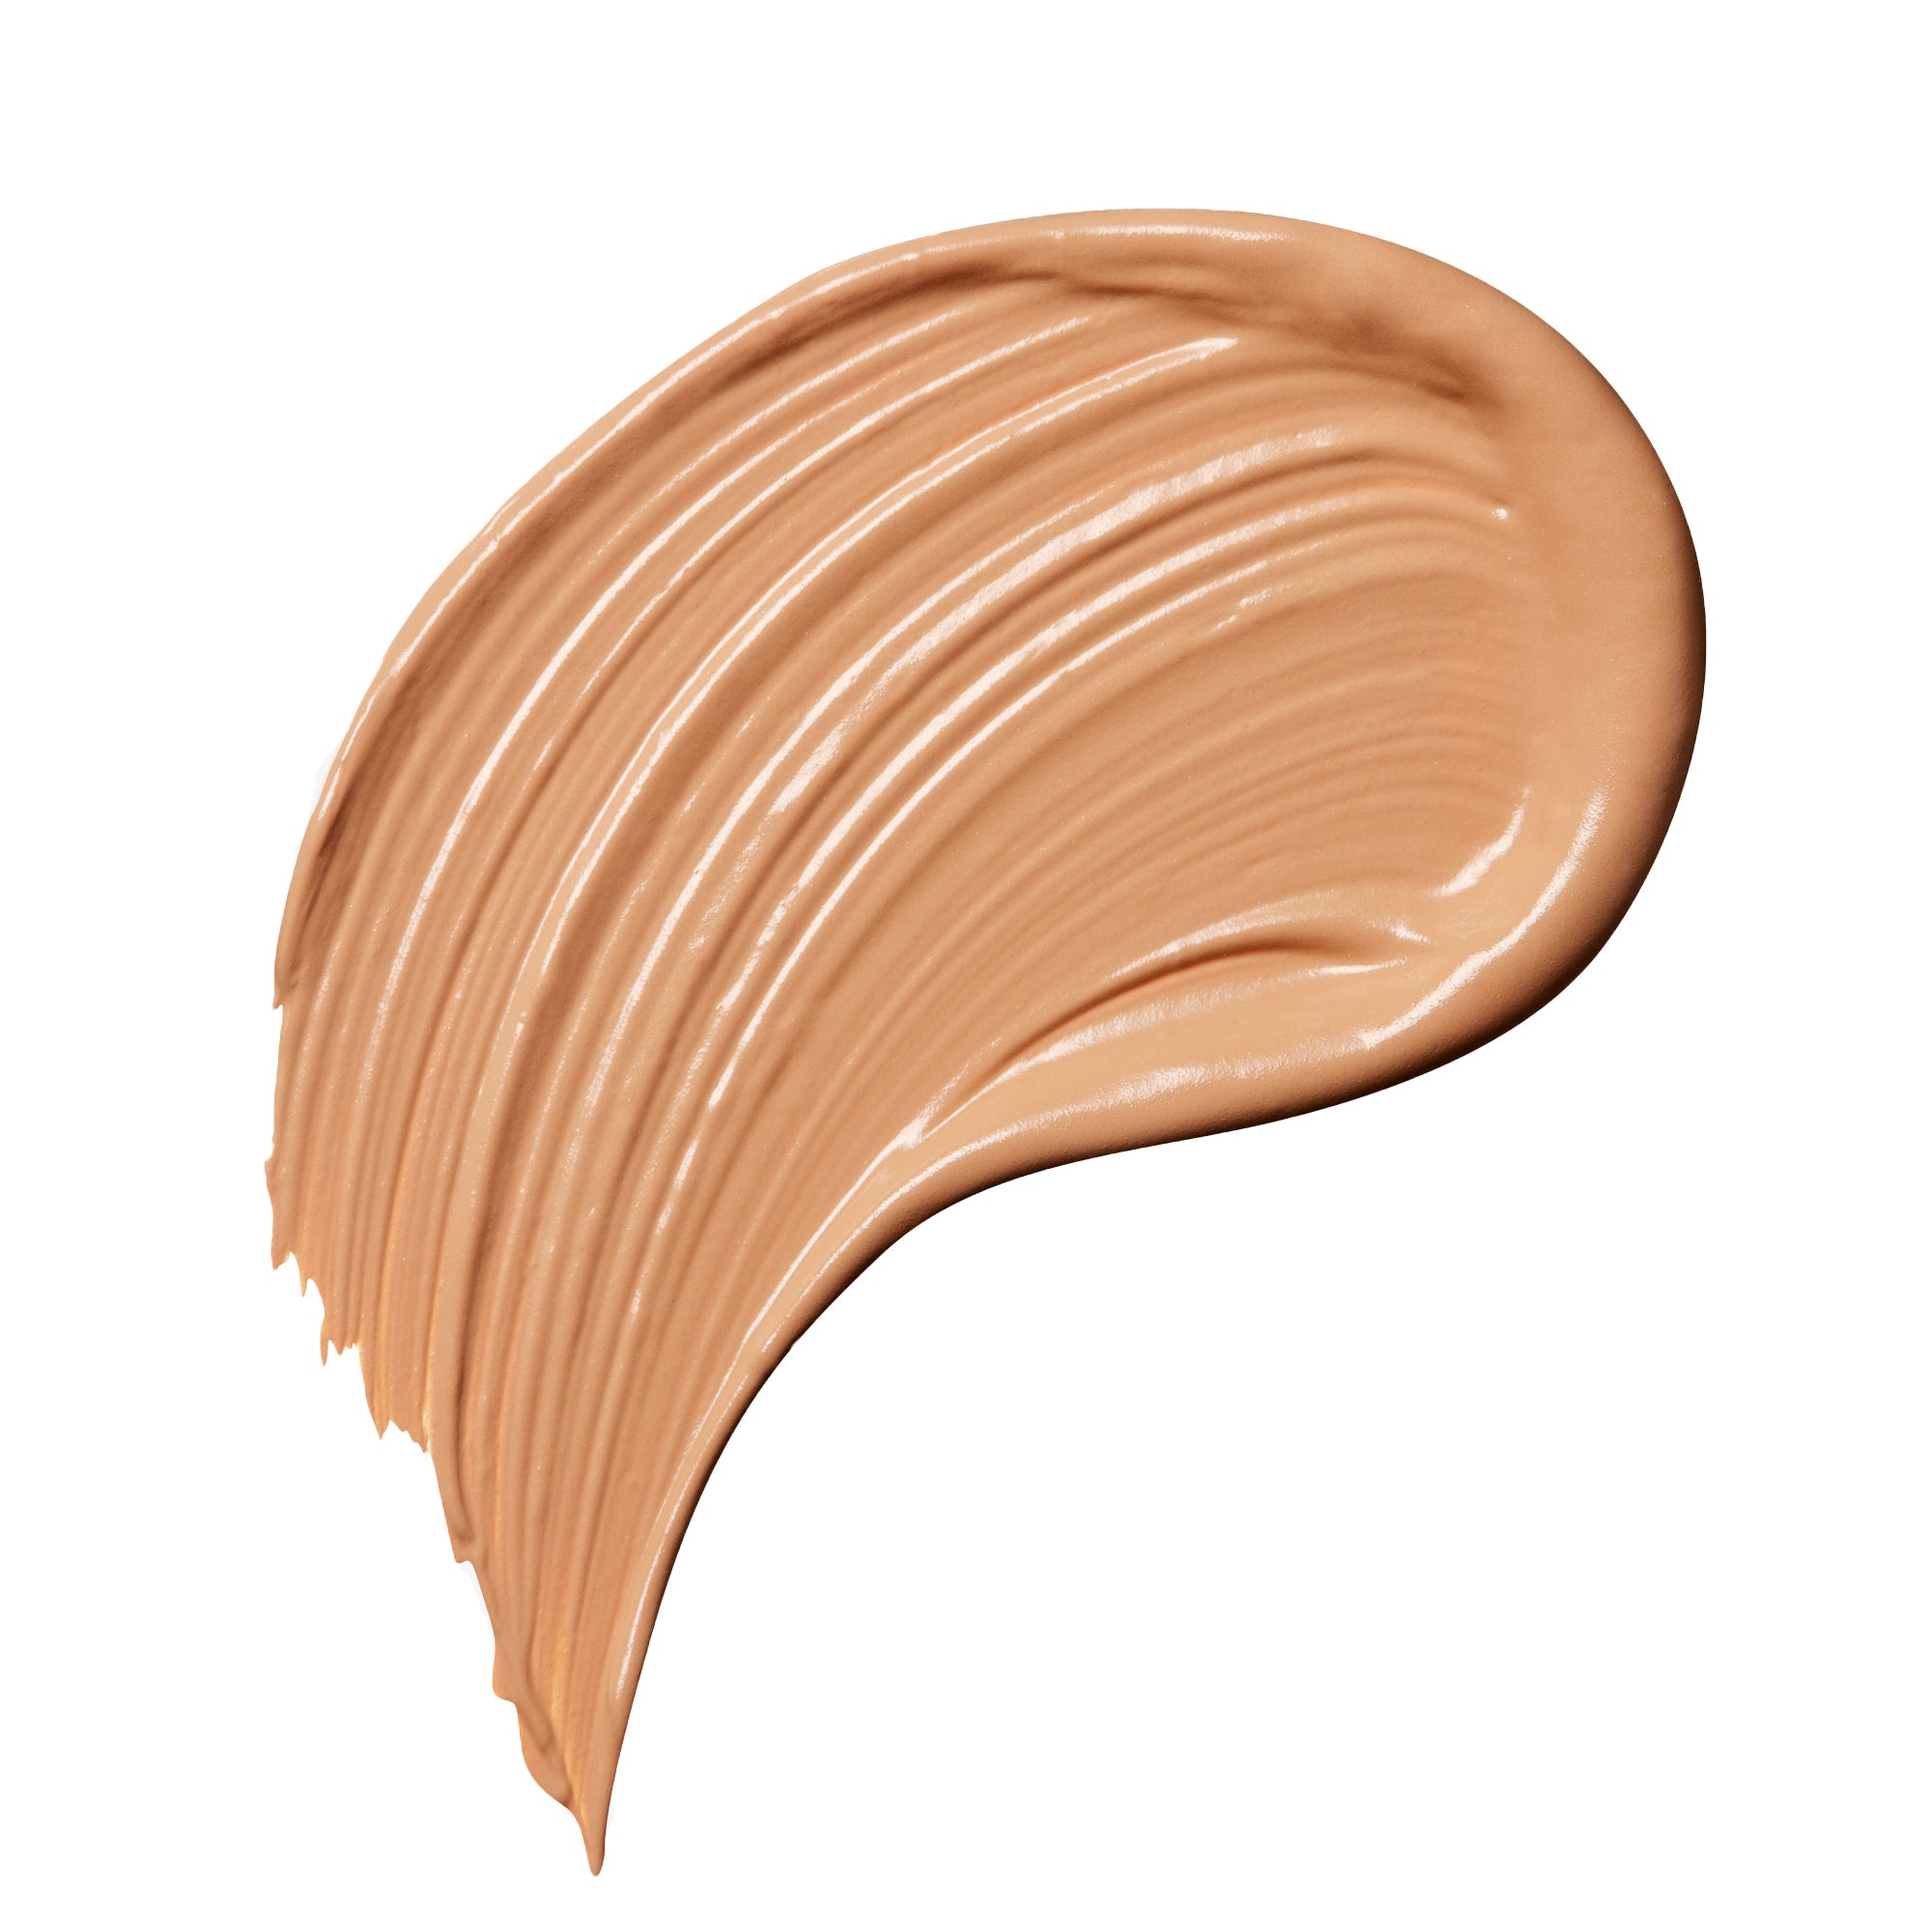 Rodial Glass Concealer / Shade 04